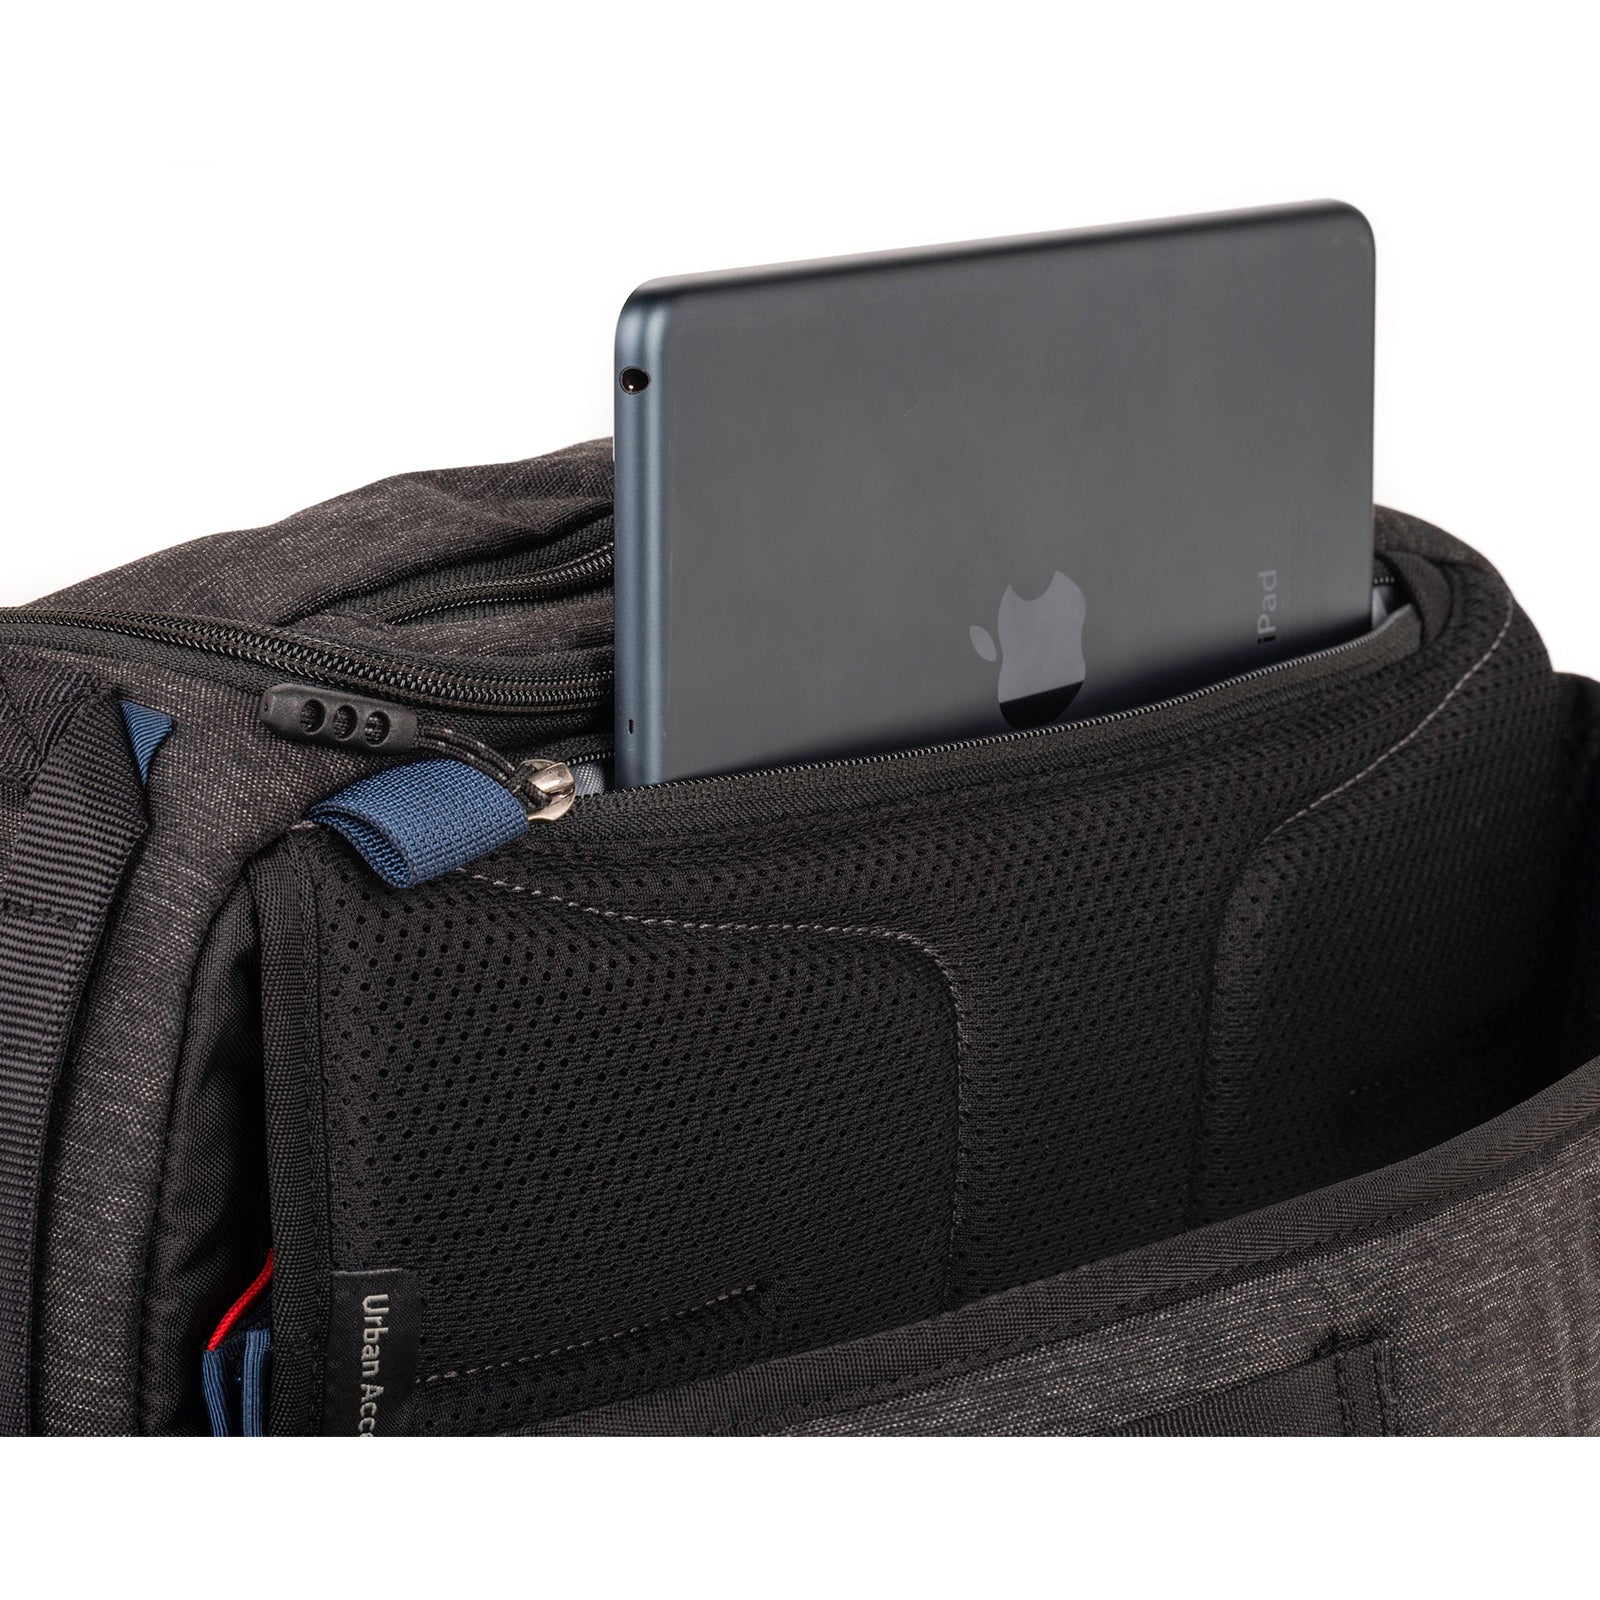 Dedicated tablet compartment fits an 8-inch tablet